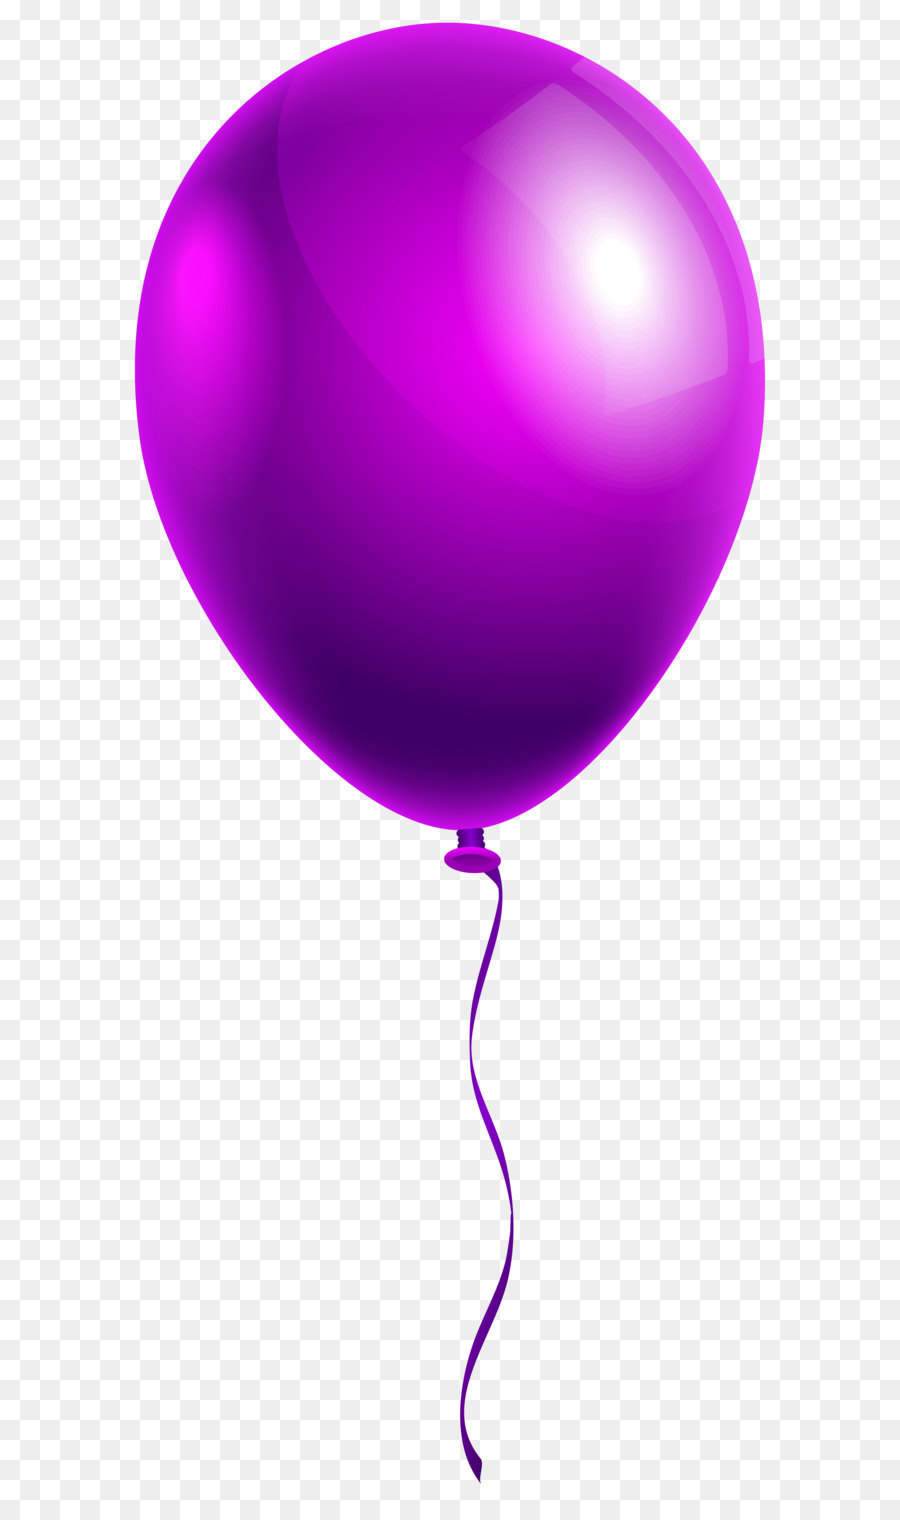 Balloon Clip art - Single Purple Balloon PNG Clipart Image png download - 2743*6361 - Free Transparent Balloon png Download.